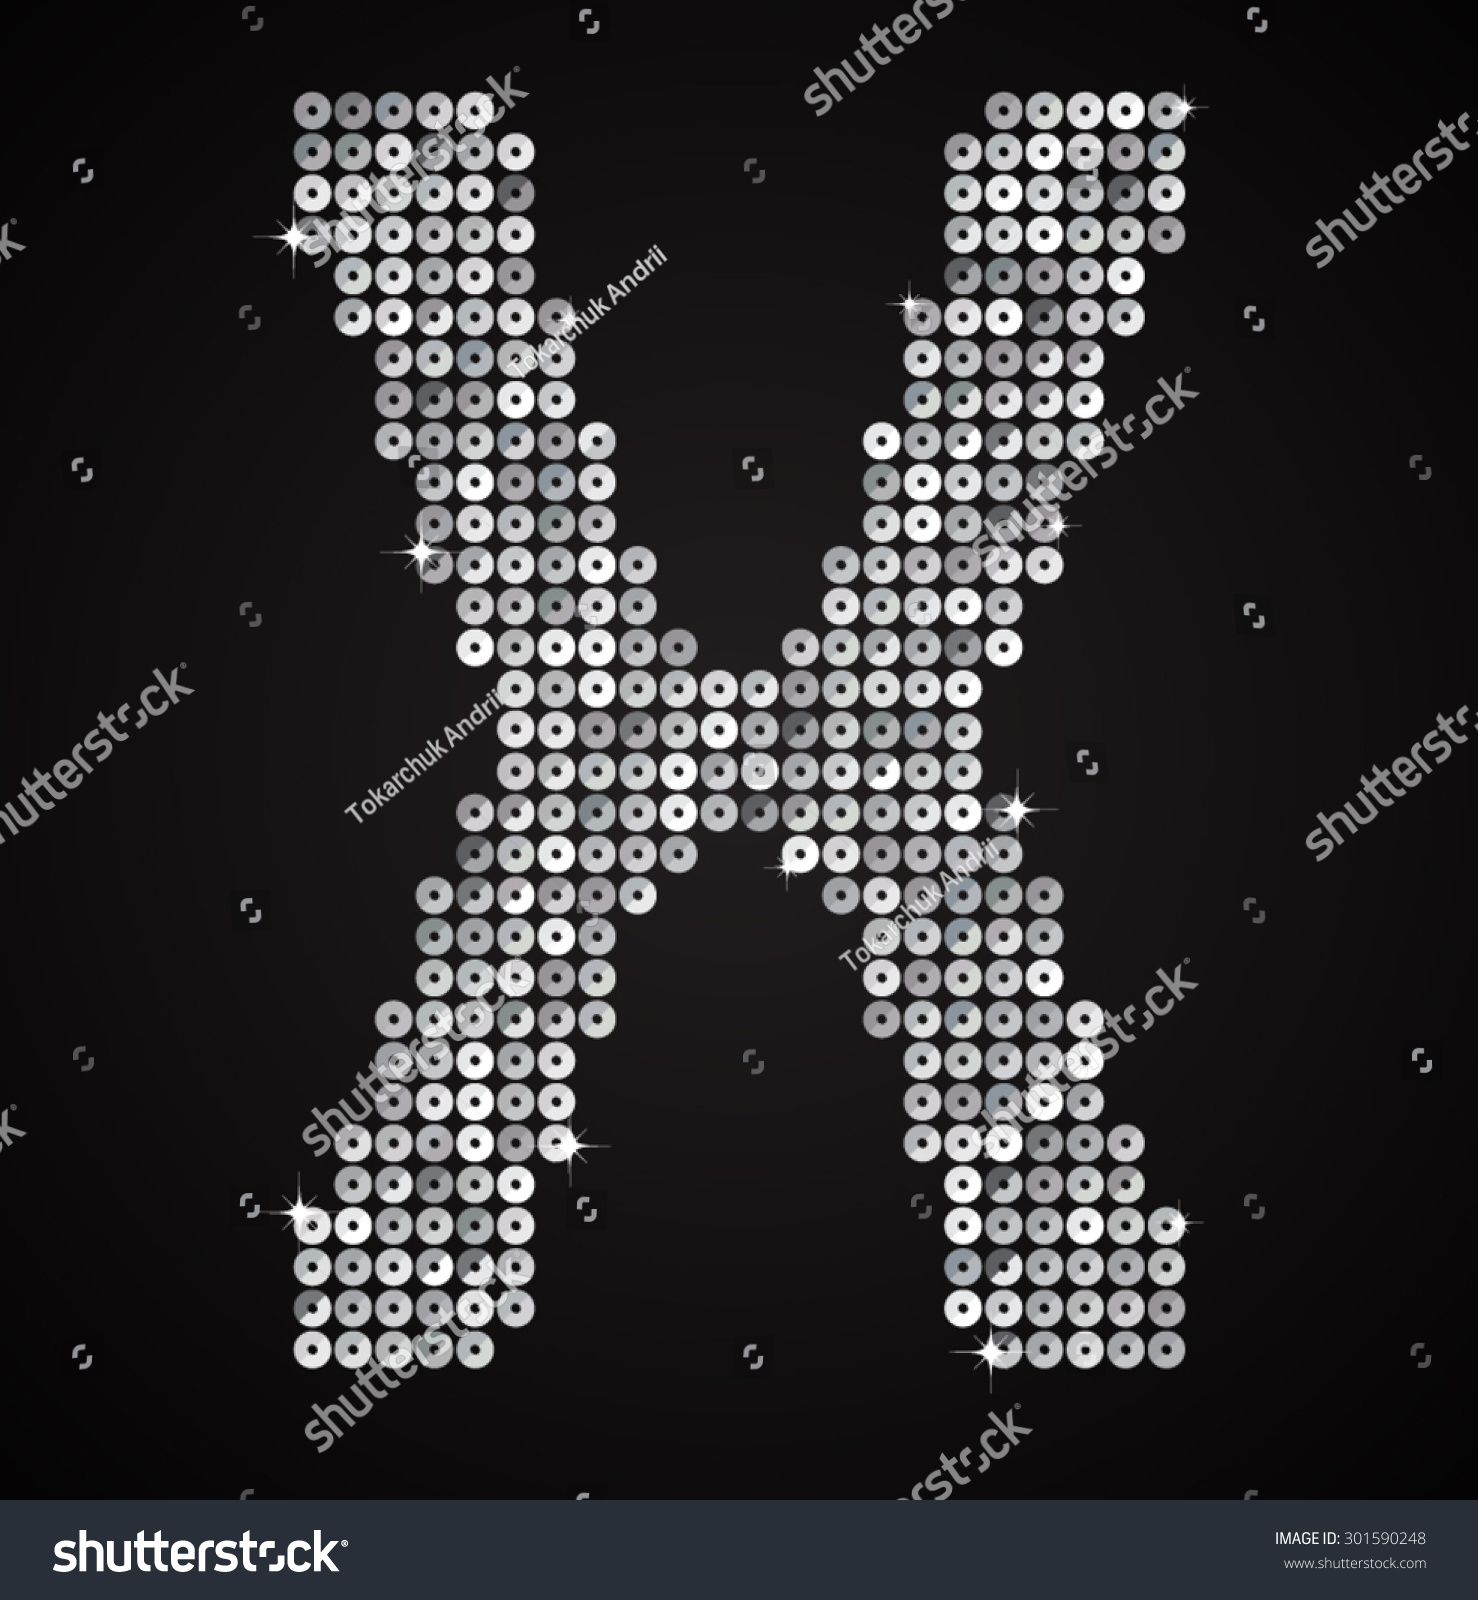 Vector Sequins Letter X Glitter Font Shape Of Royalty Free Stock Vector 301590248